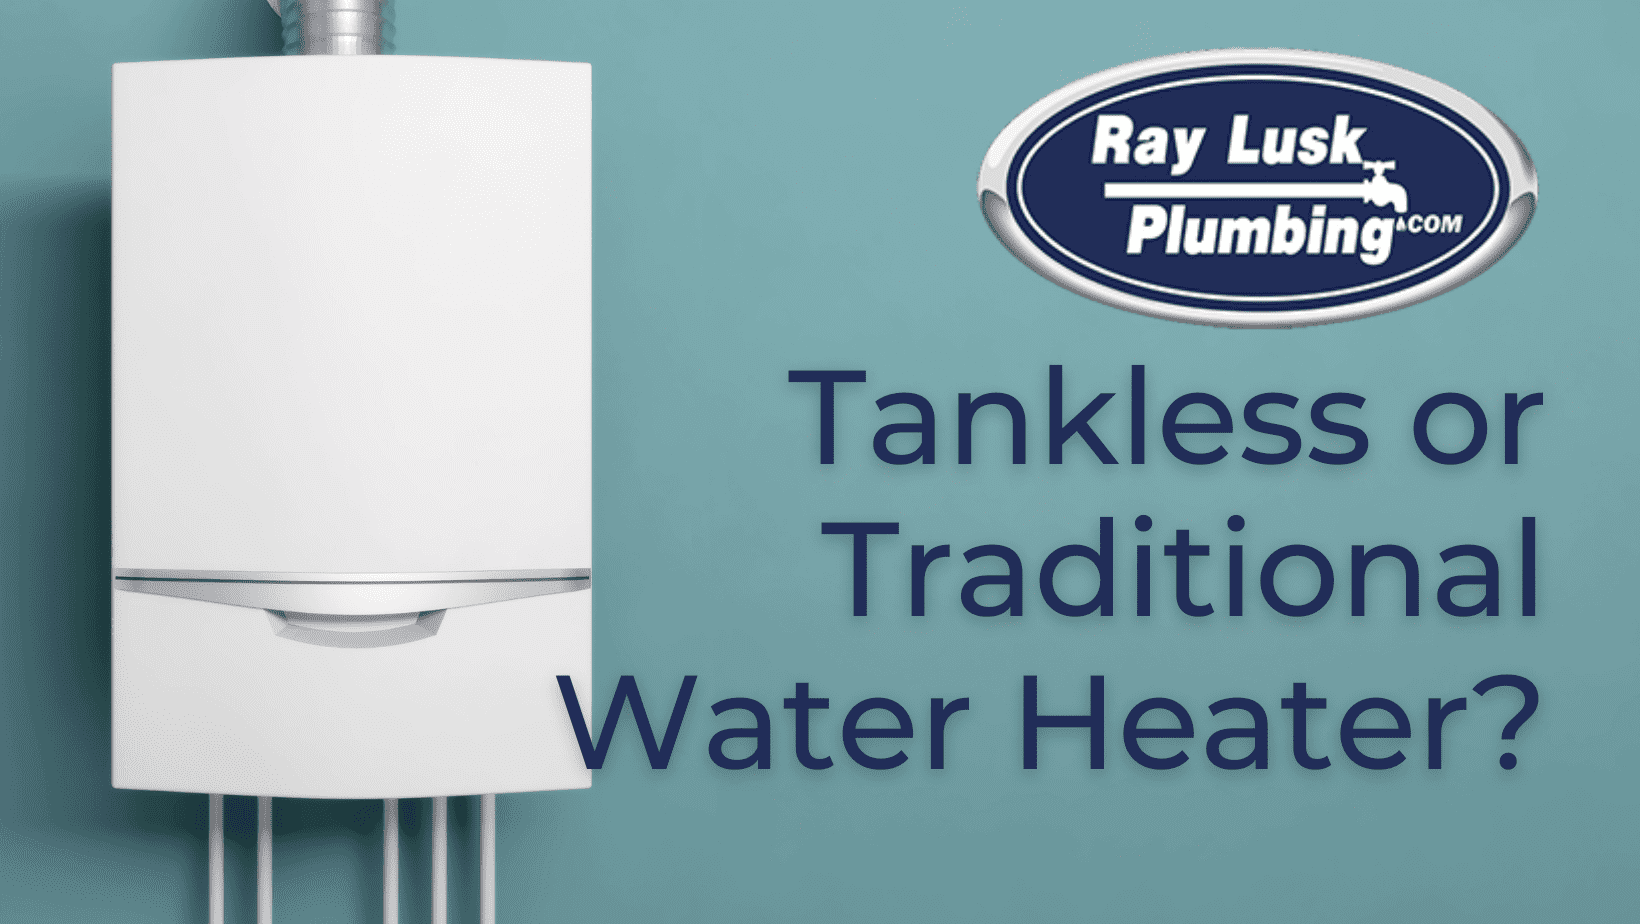 Image text reads: Tankless or traditional water heater?